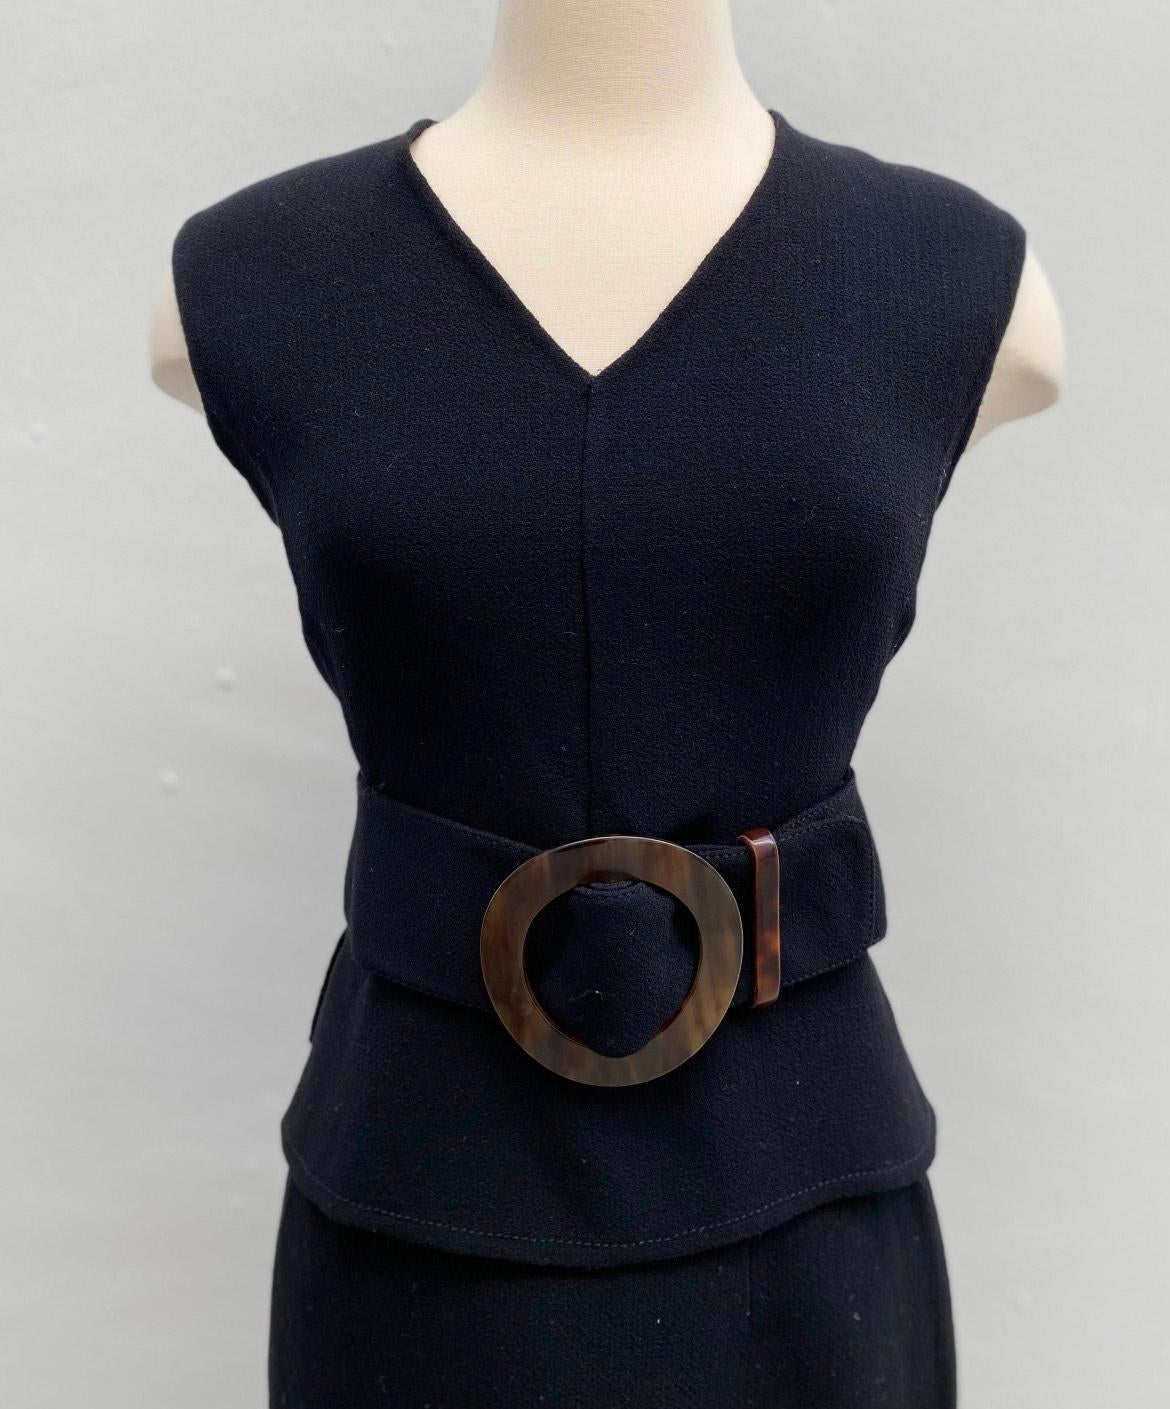 1990s Valentino set of vest style top with a wide matching fabric belt and big round tortoiseshell buckle and mini skirt, back zip up.  Sixtiess style but made in the Nineties.  No fabric label but feels like a light crepe wool, single layer with no